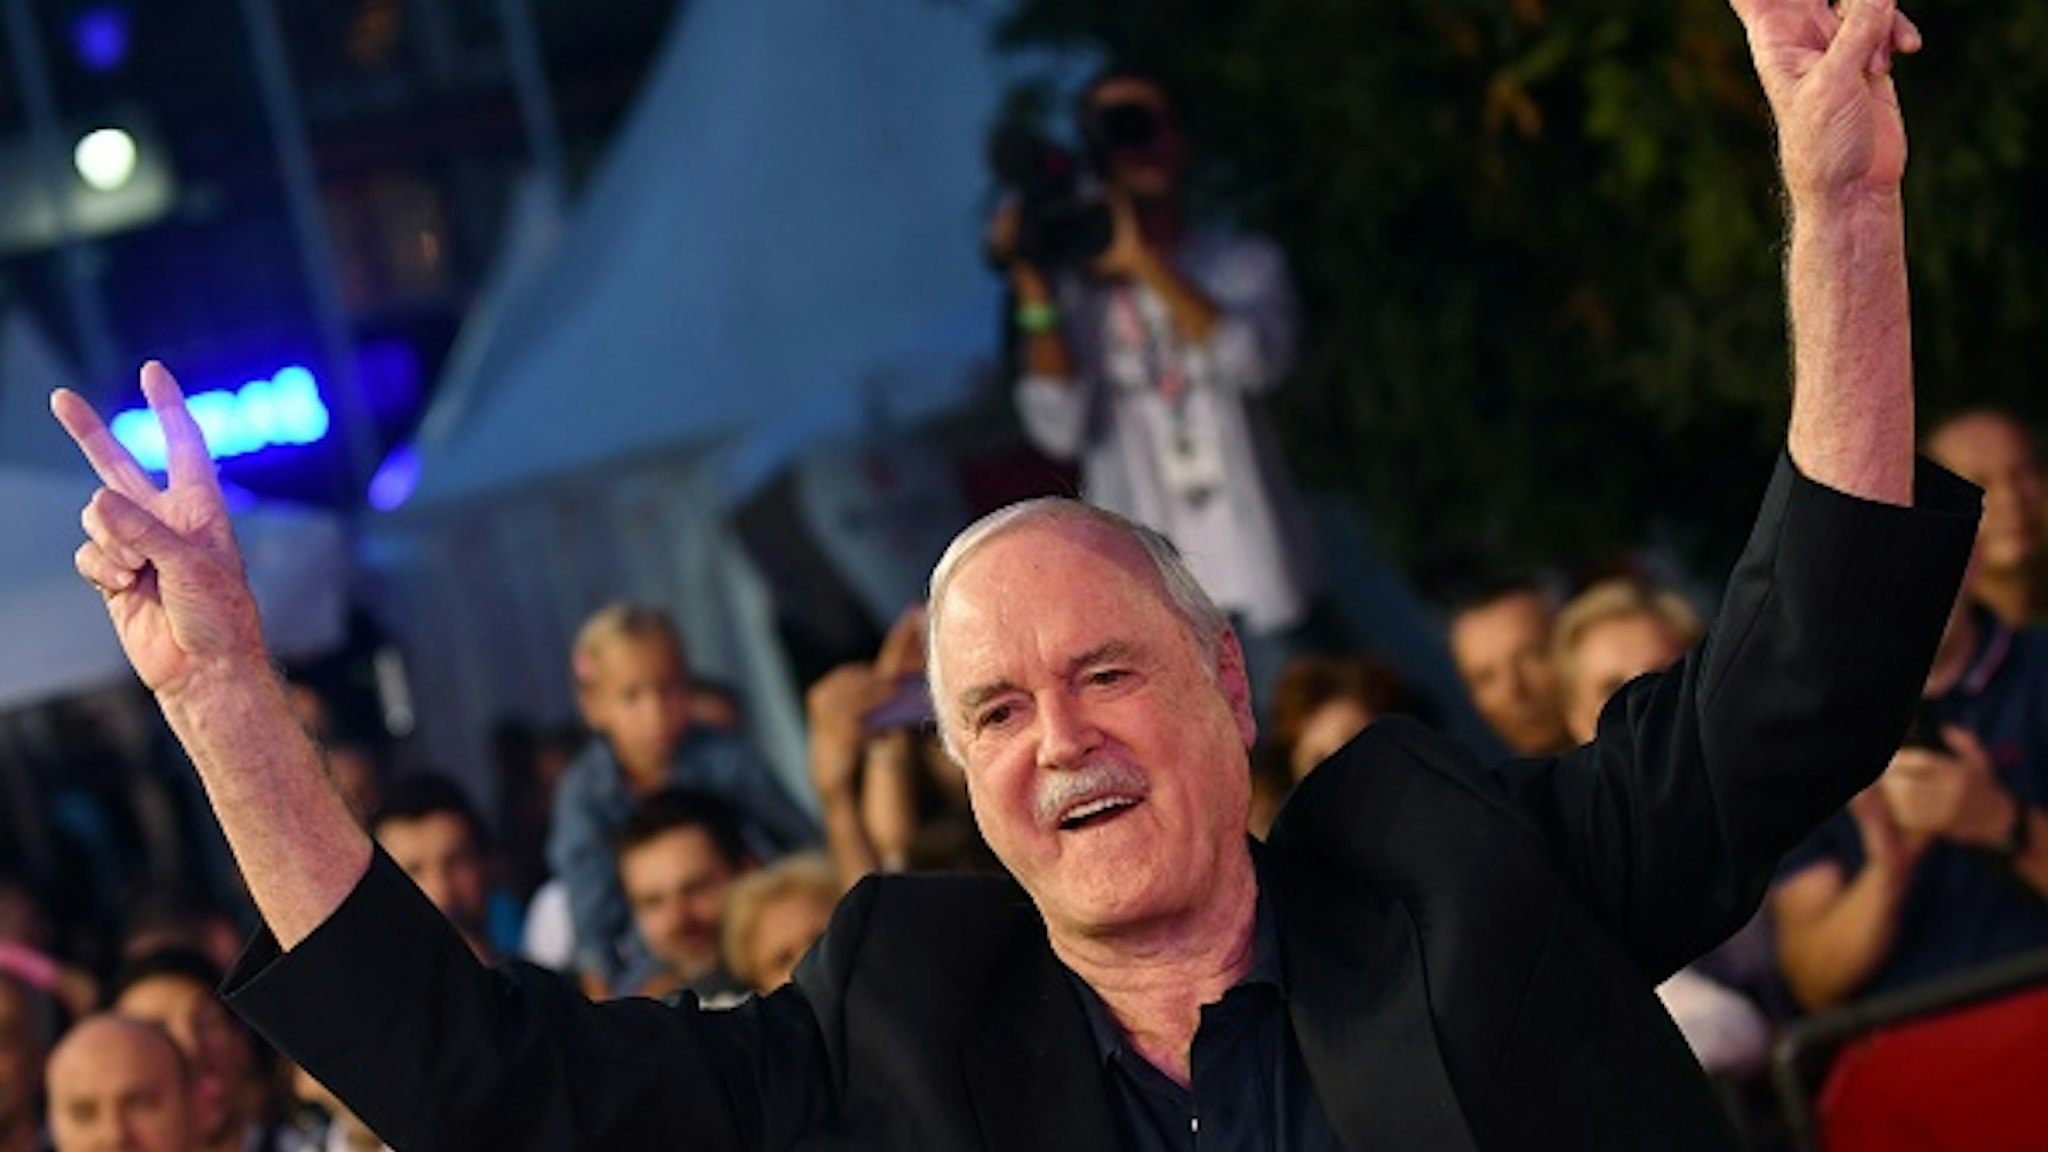 British actor John Cleese arrives for the 23rd Sarajevo Film Festival late on August 16, 2017, where he is to receive the 'Honorary Heart Of Sarajevo' award for his "extraordinary contribution" to film. / AFP PHOTO / ELVIS BARUKCIC